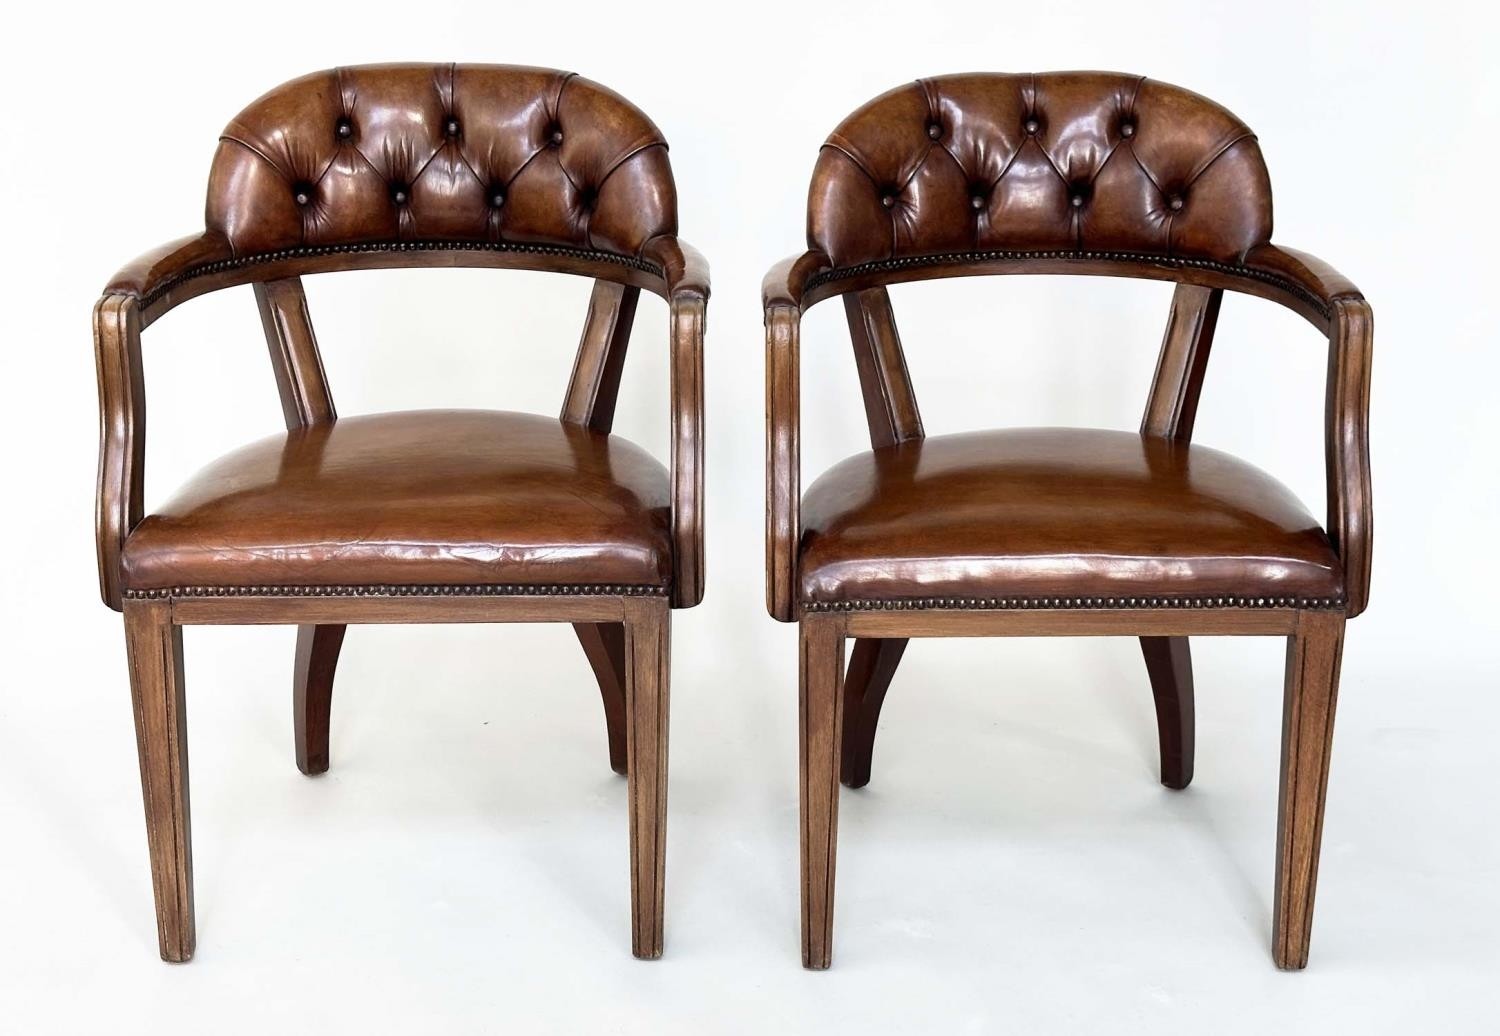 LIBRARY ARMCHAIRS, a pair, Georgian design antique studded and buttoned soft tan brown leather